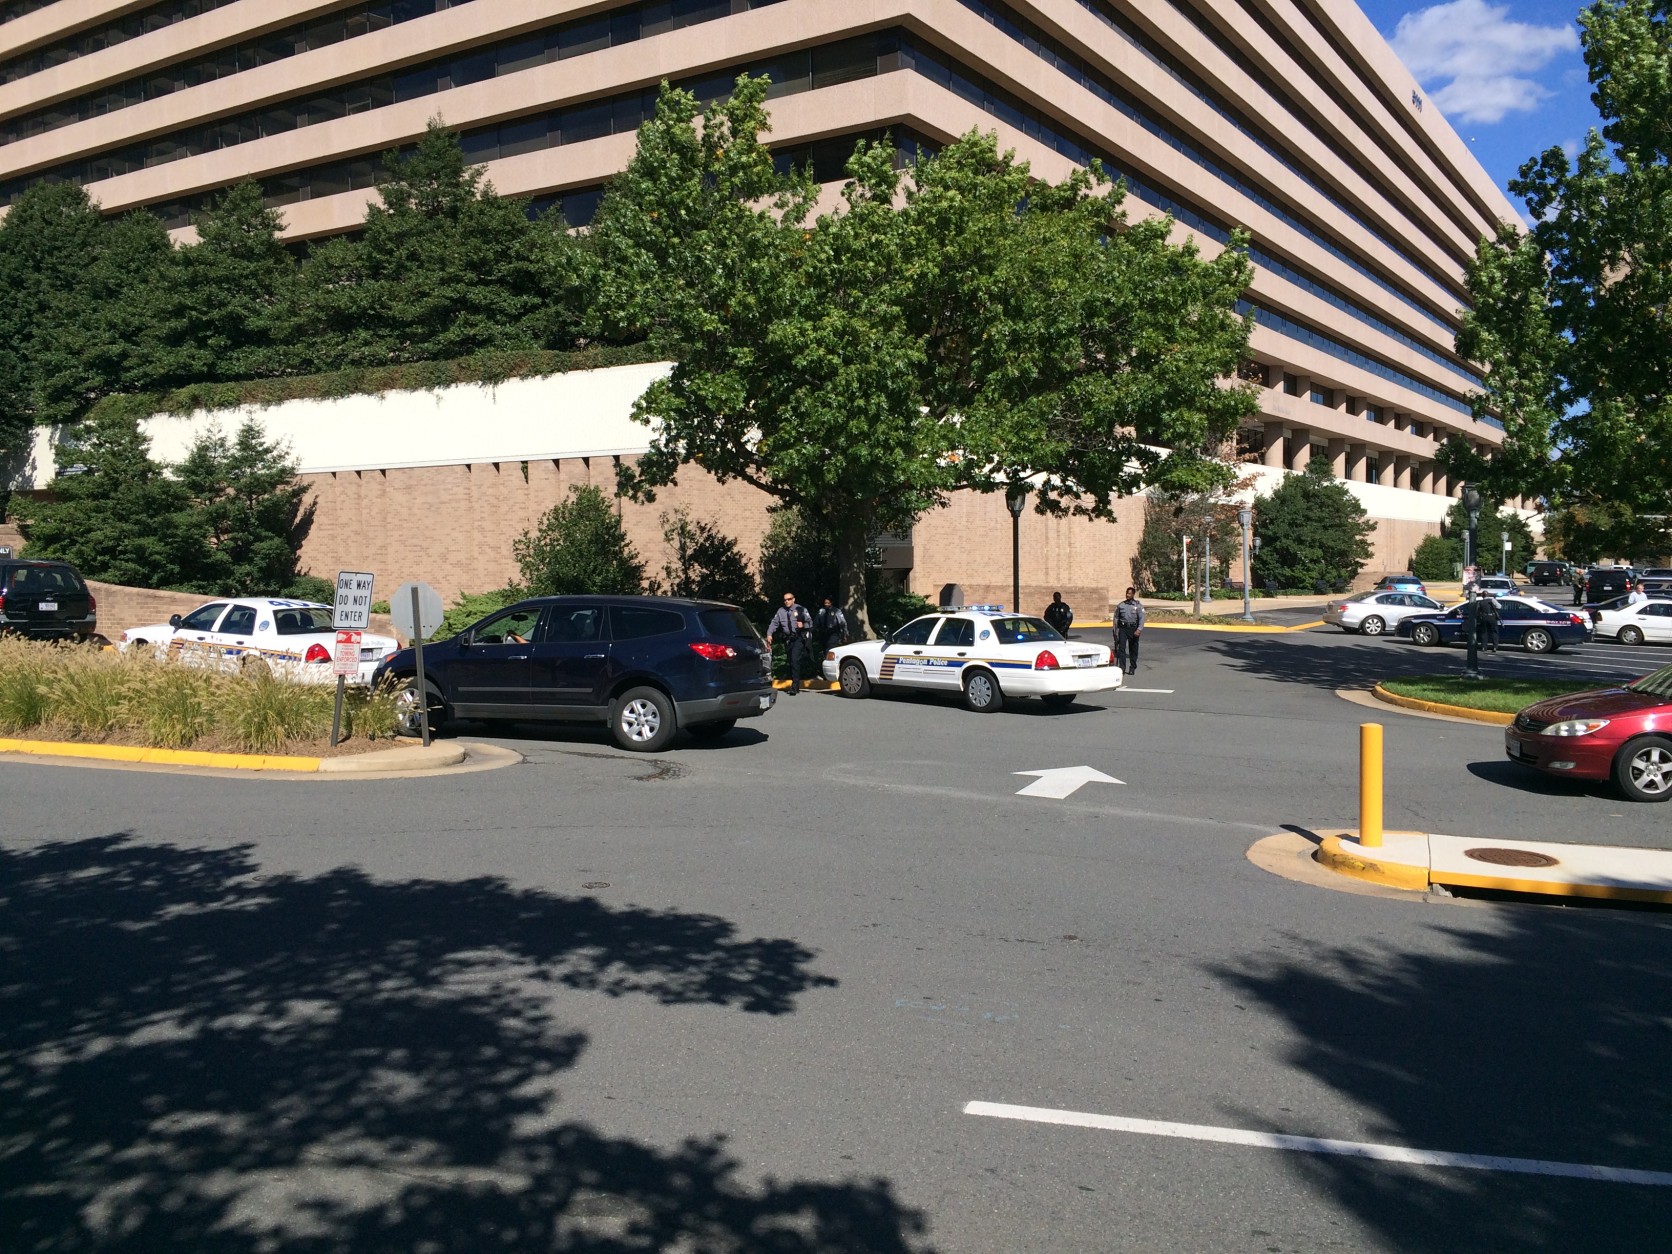 Fairfax County police says they were not aware of the drill and didn’t know which company was holding it. Neither Arlington County police nor the FBI Washington Field Office were aware of the drill either, both agencies told WTOP. (WTOP/Mike Murillo)